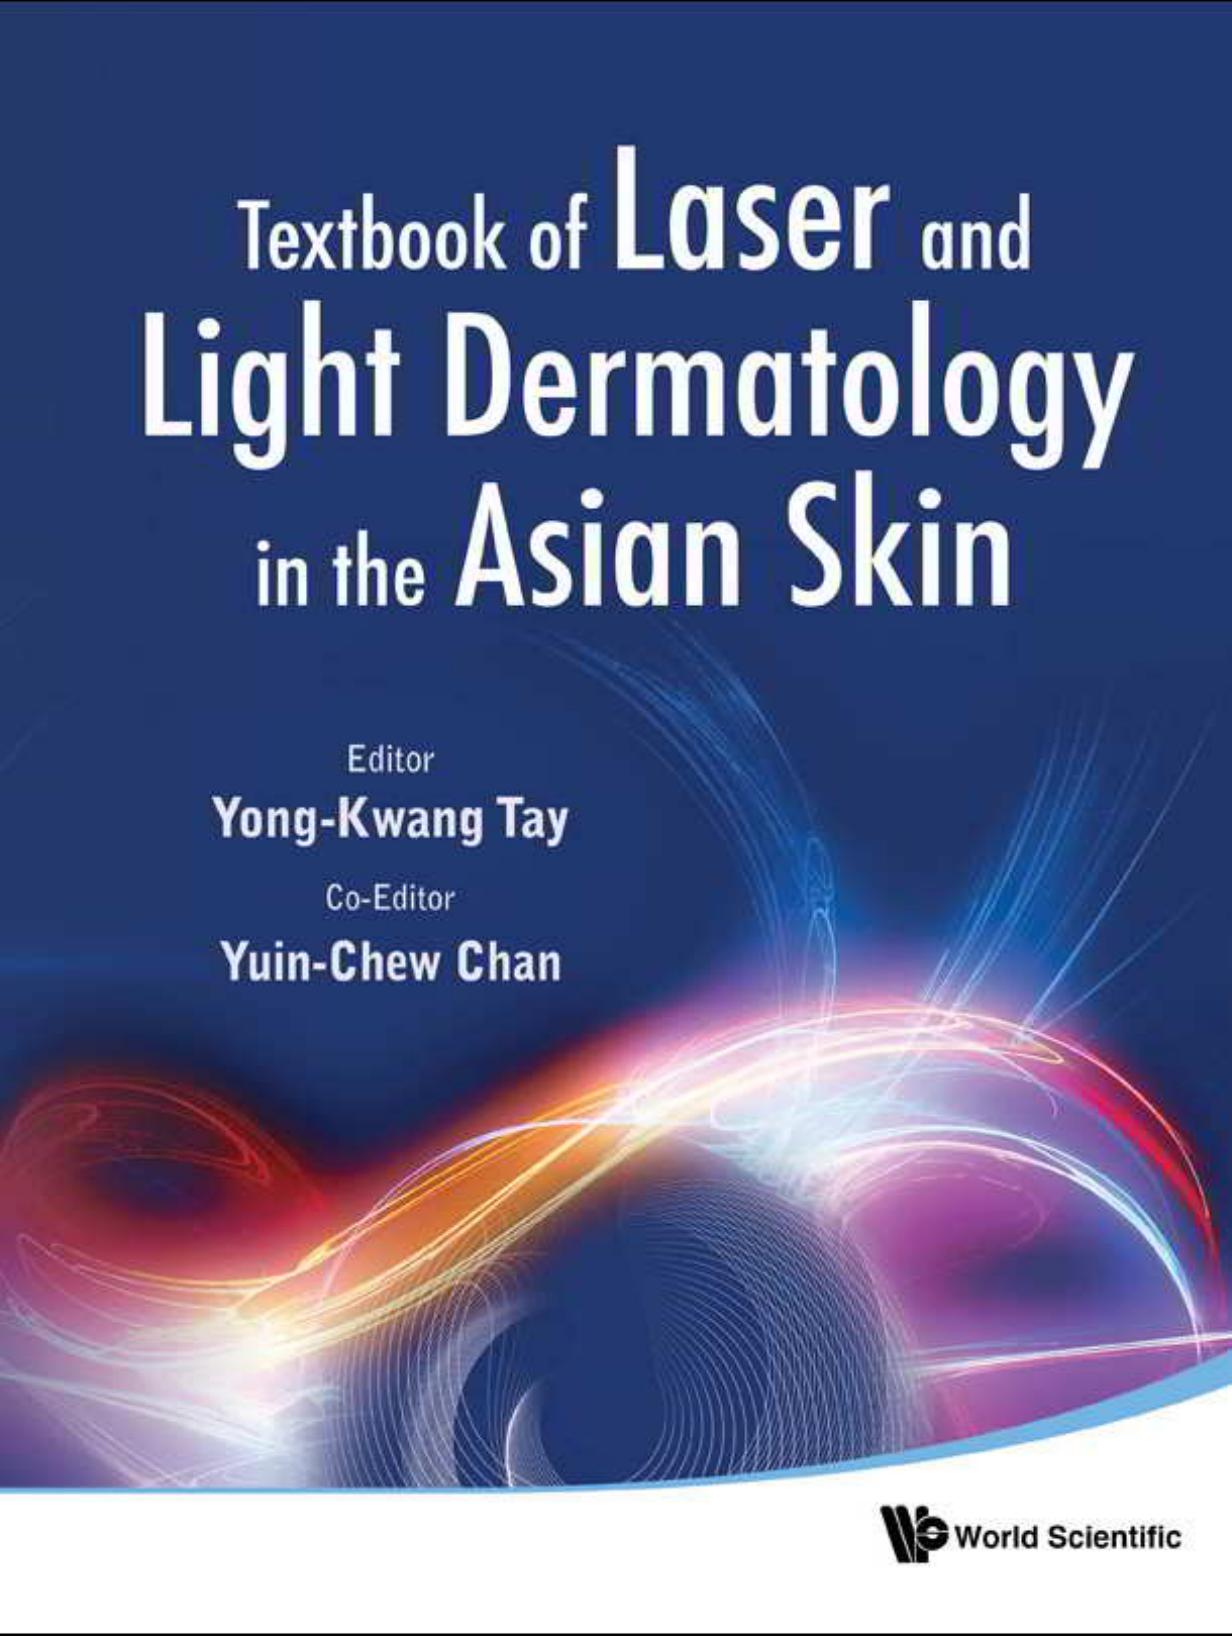 (eBook PDF)Textbook of Laser and Light Dermatology in the Asian Skin 1st Edition by Yong-Kwang Tay, Yuin-Chew Chan